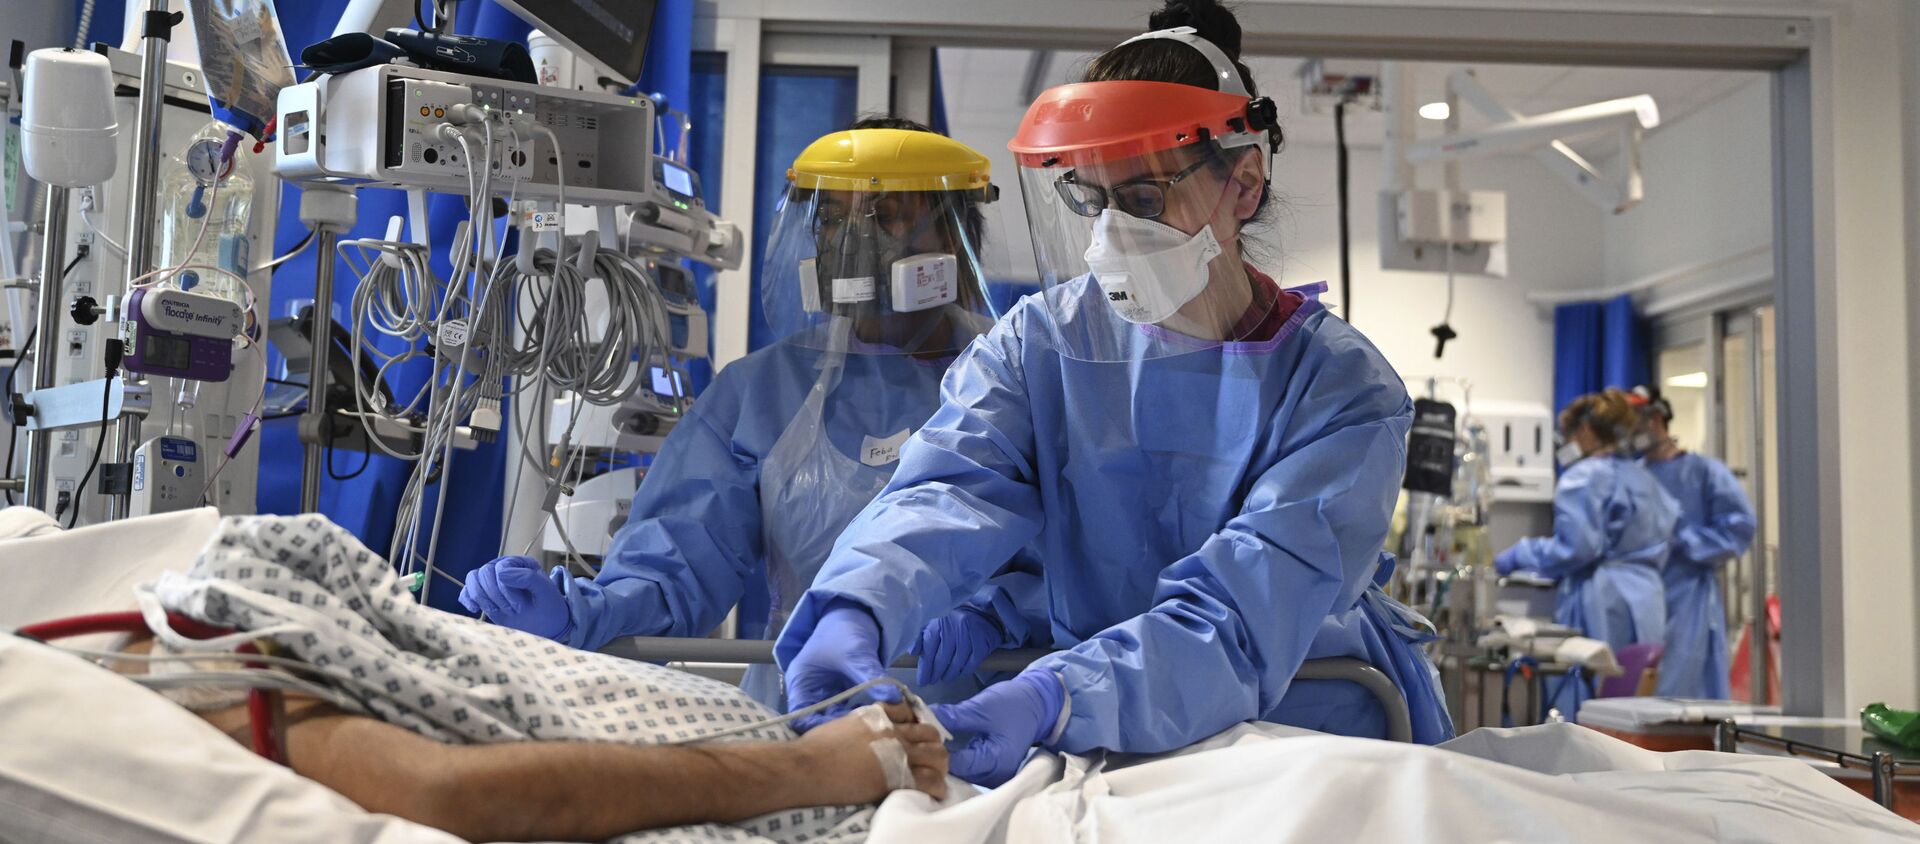 Members of the clinical staff wearing Personal Protective Equipment PPE care for a patient with coronavirus in the intensive care unit at the Royal Papworth Hospital in Cambridge, 5 May 2020 - Sputnik International, 1920, 22.04.2021